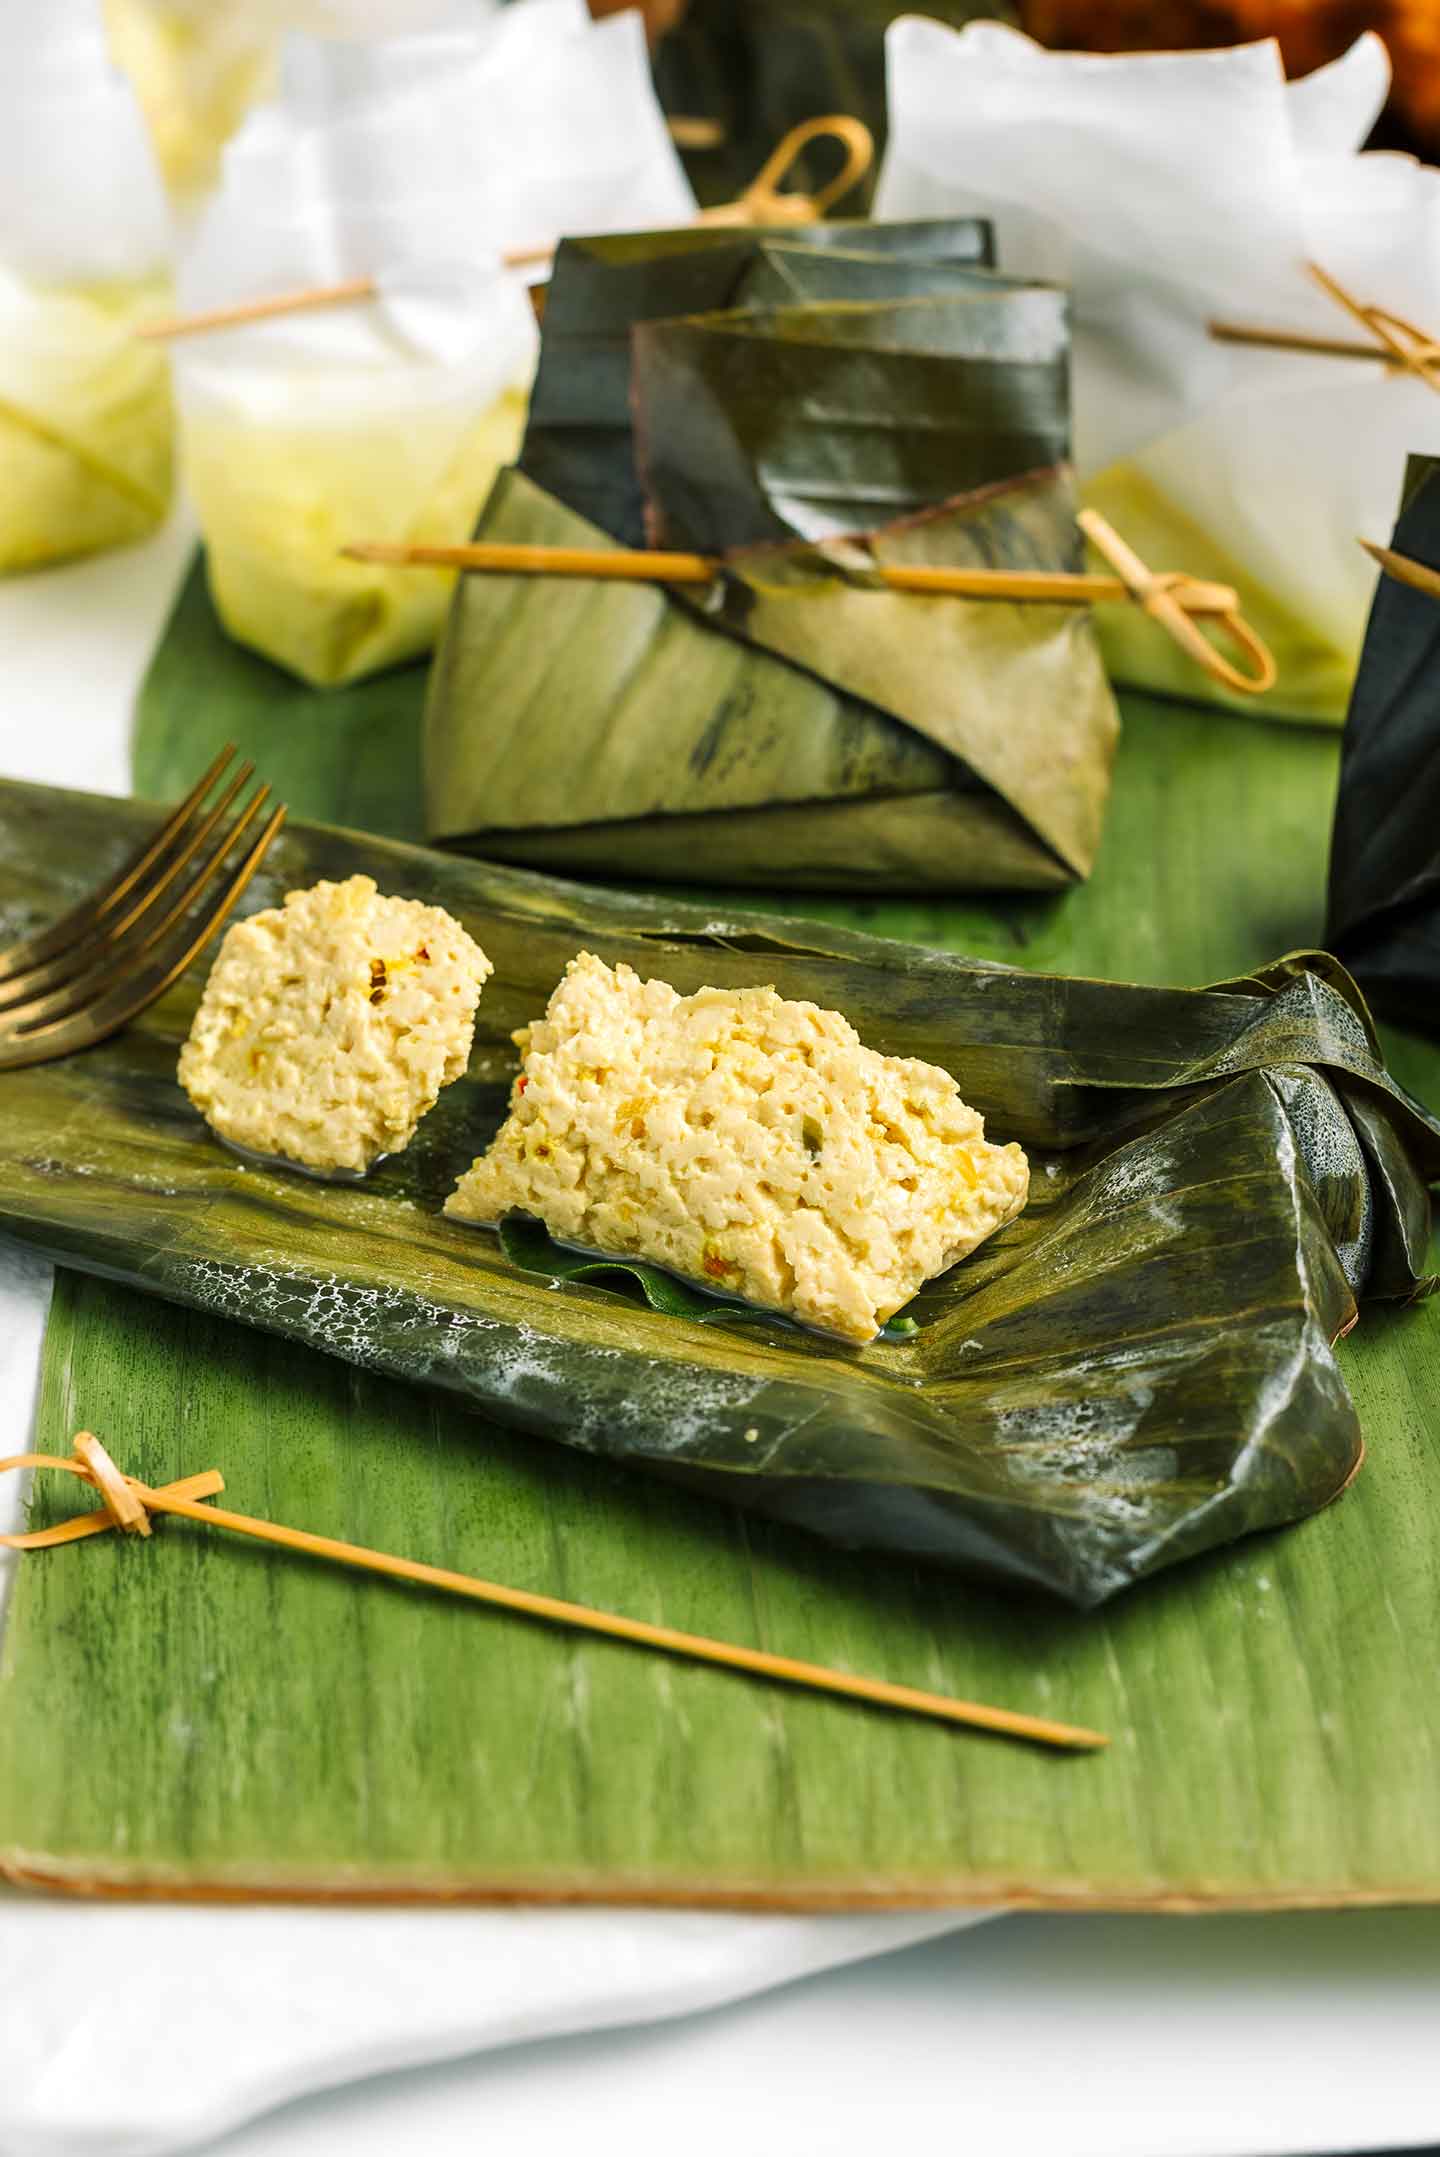 A steamed piece of tofu is displayed in the centre of an opened banana leaf steaming packet. The tofu is formed like a soft dumpling speckled with herbs and spices. Unopened tofu pockets stand in the background.